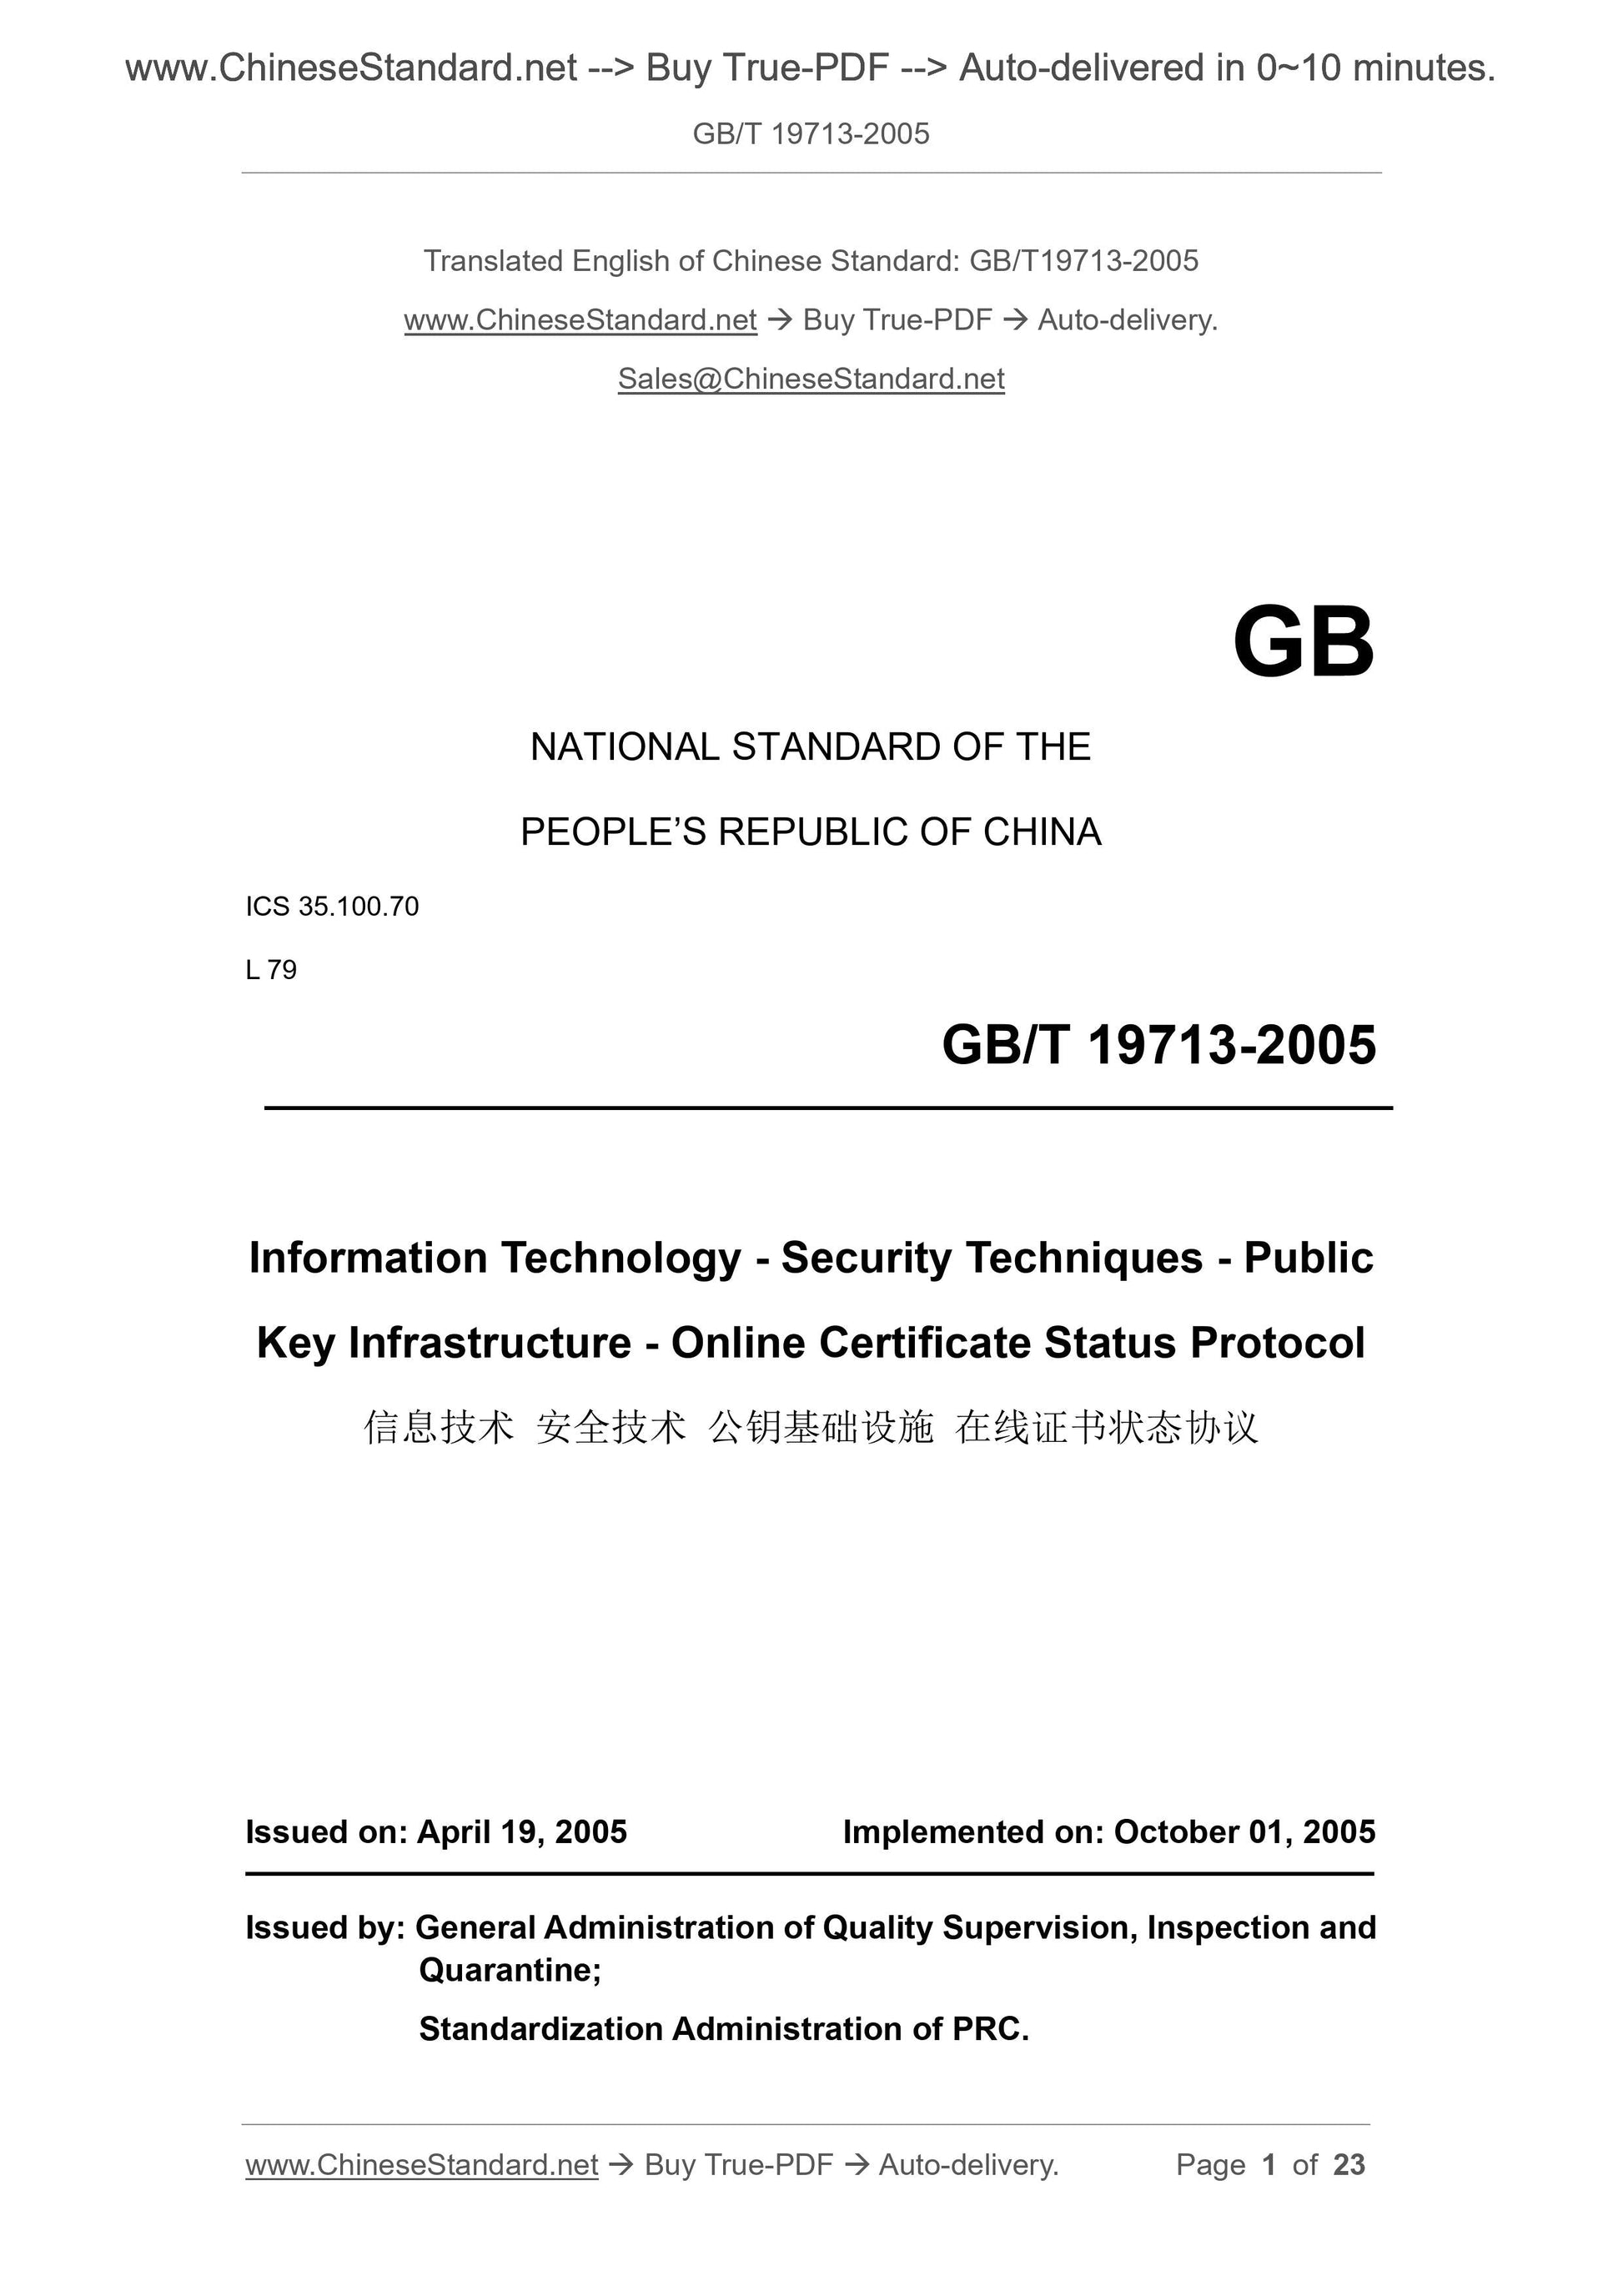 GB/T 19713-2005 Page 1